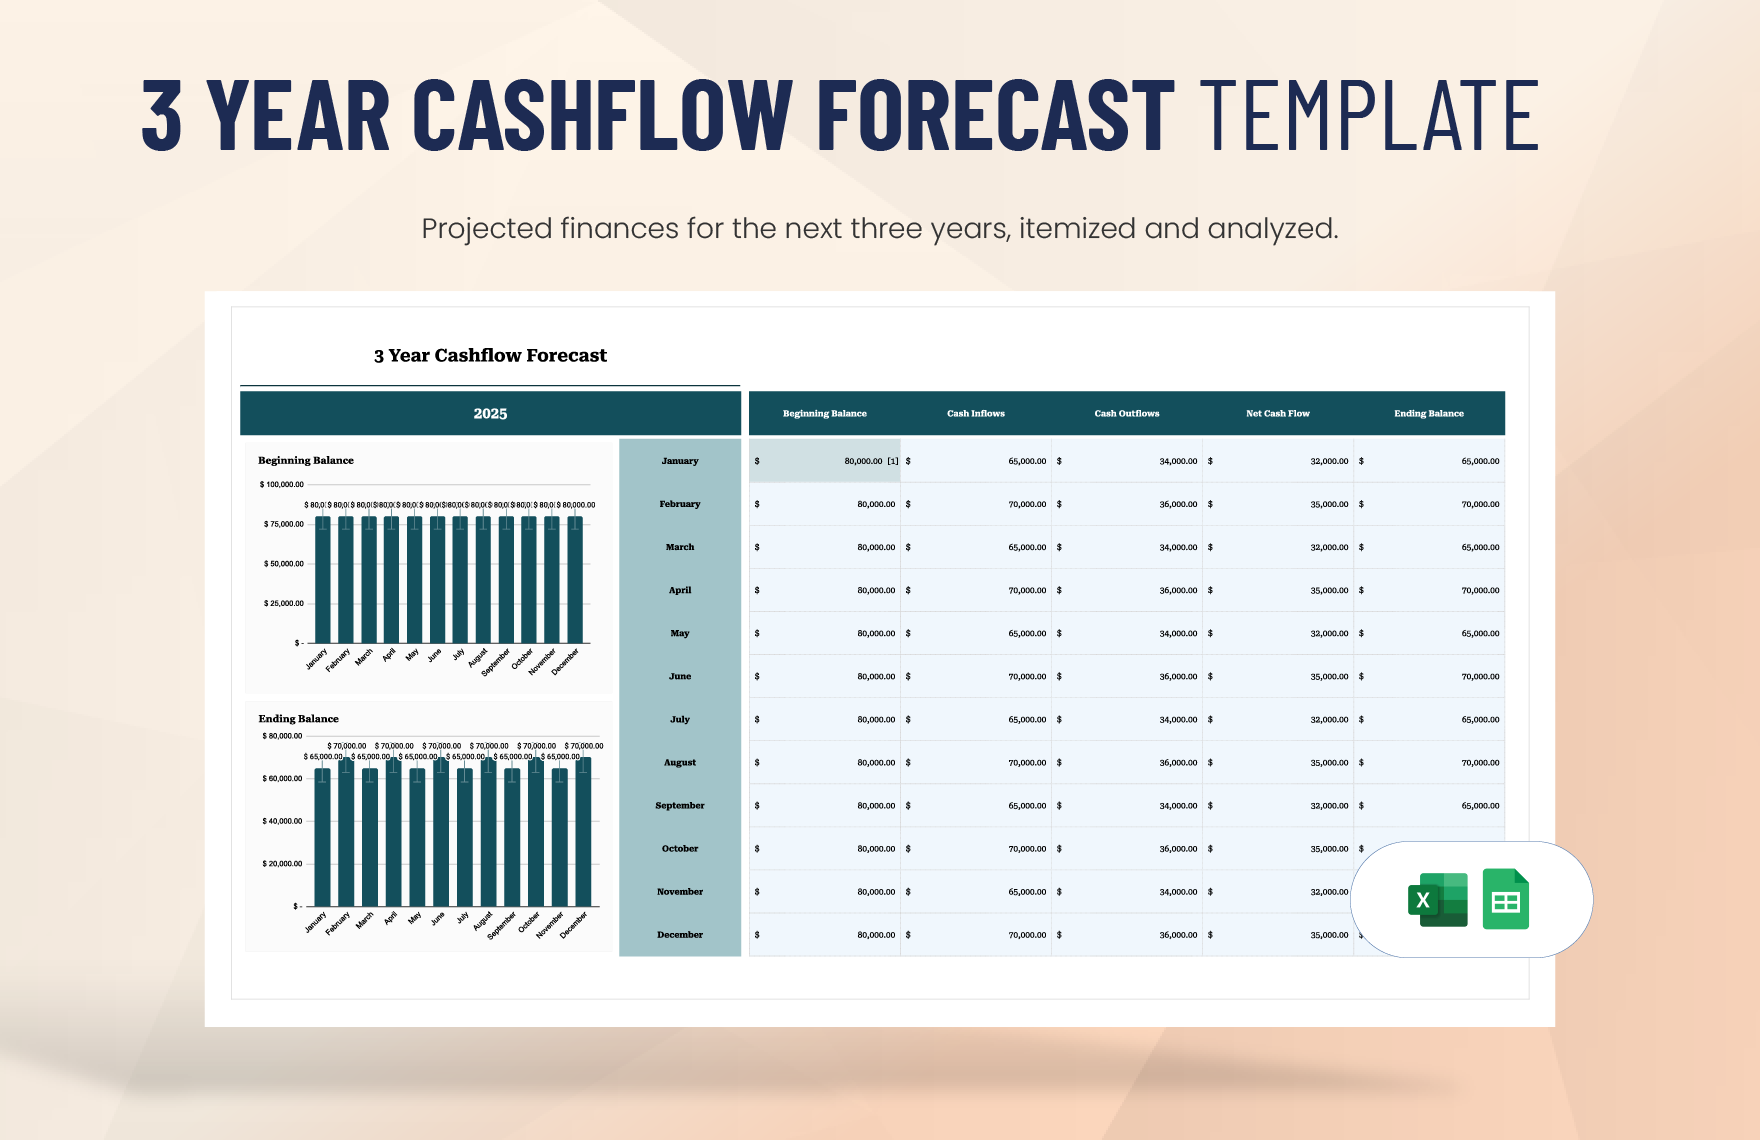 3 Year Cashflow Forecast Template in Excel, Google Sheets